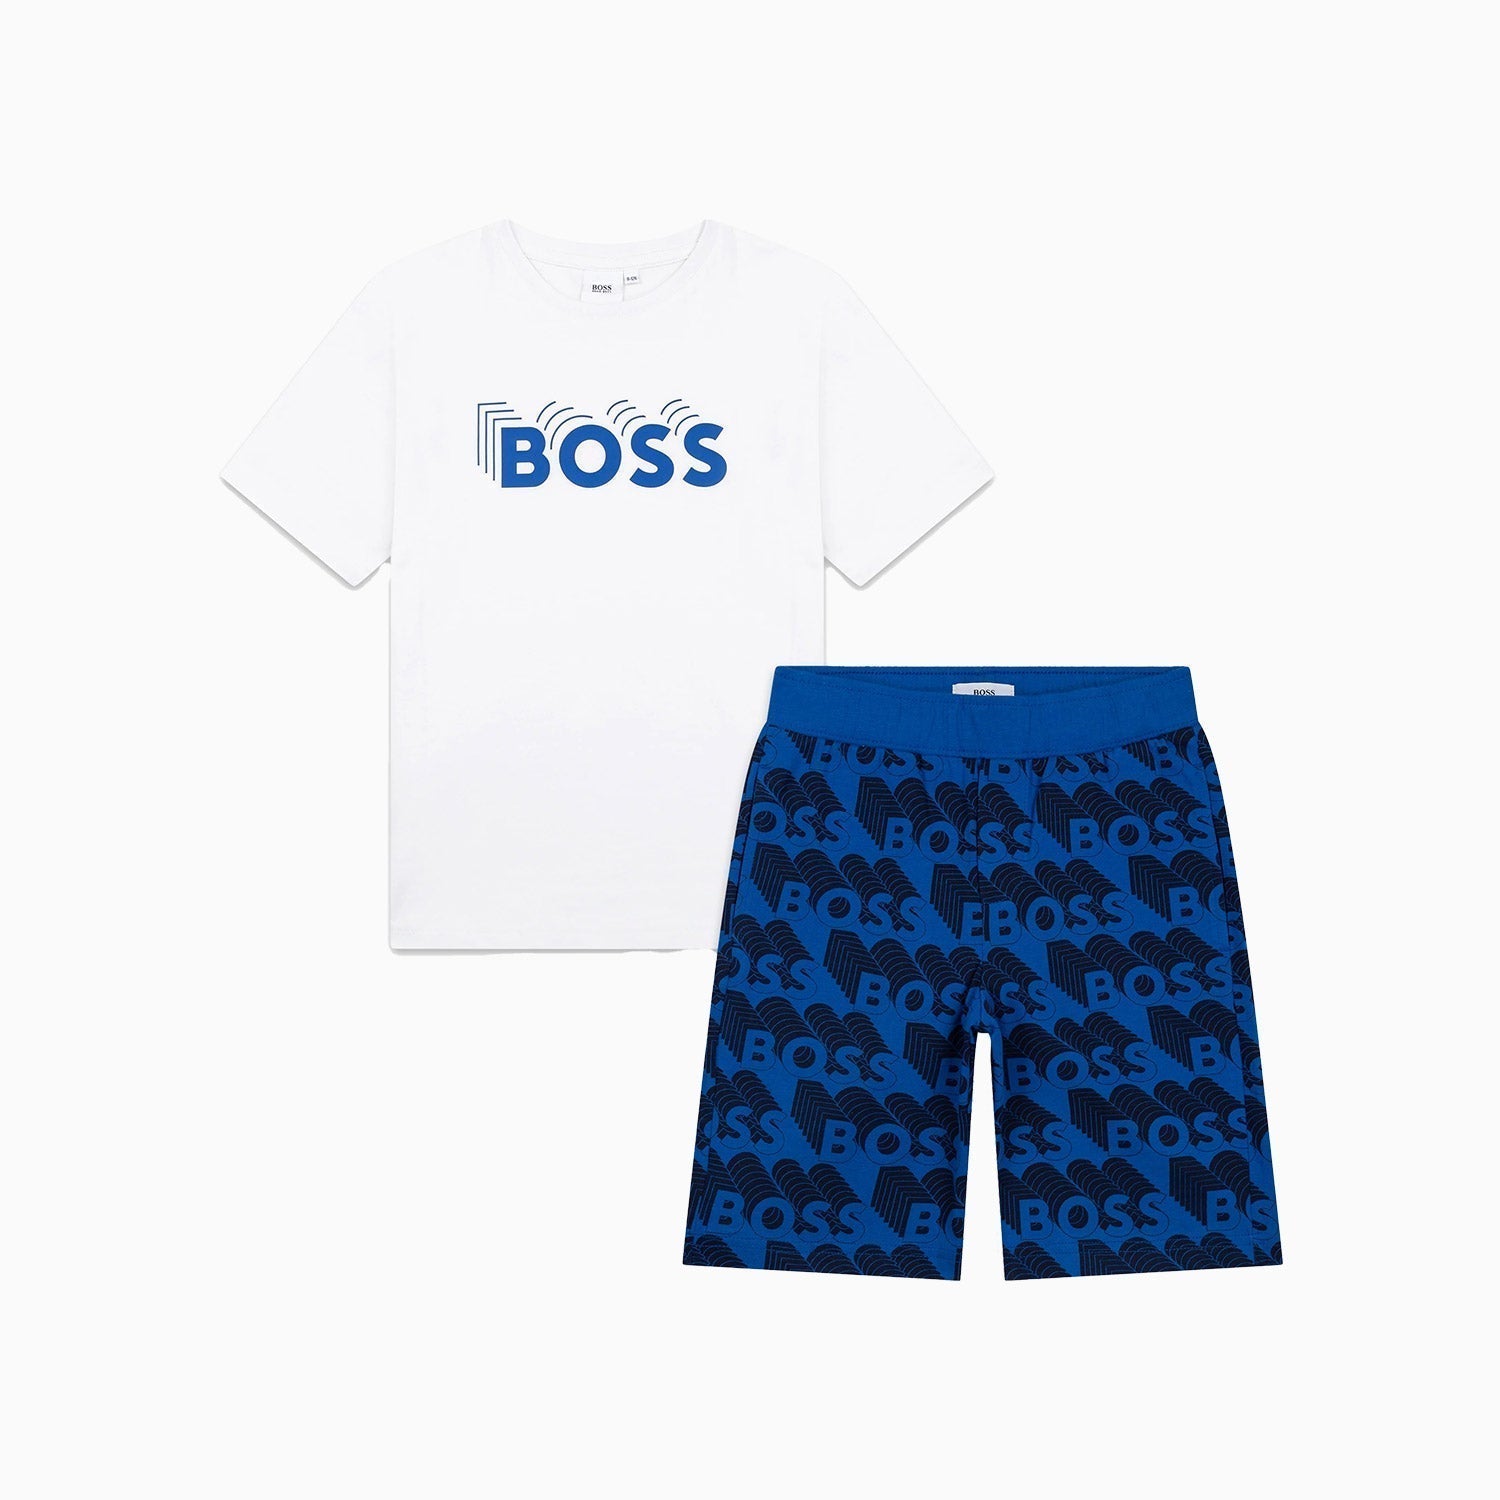 Hugo Boss Kid's T Shirt And Shorts Outfit - Color: Electric Blue - Kids Premium Clothing -